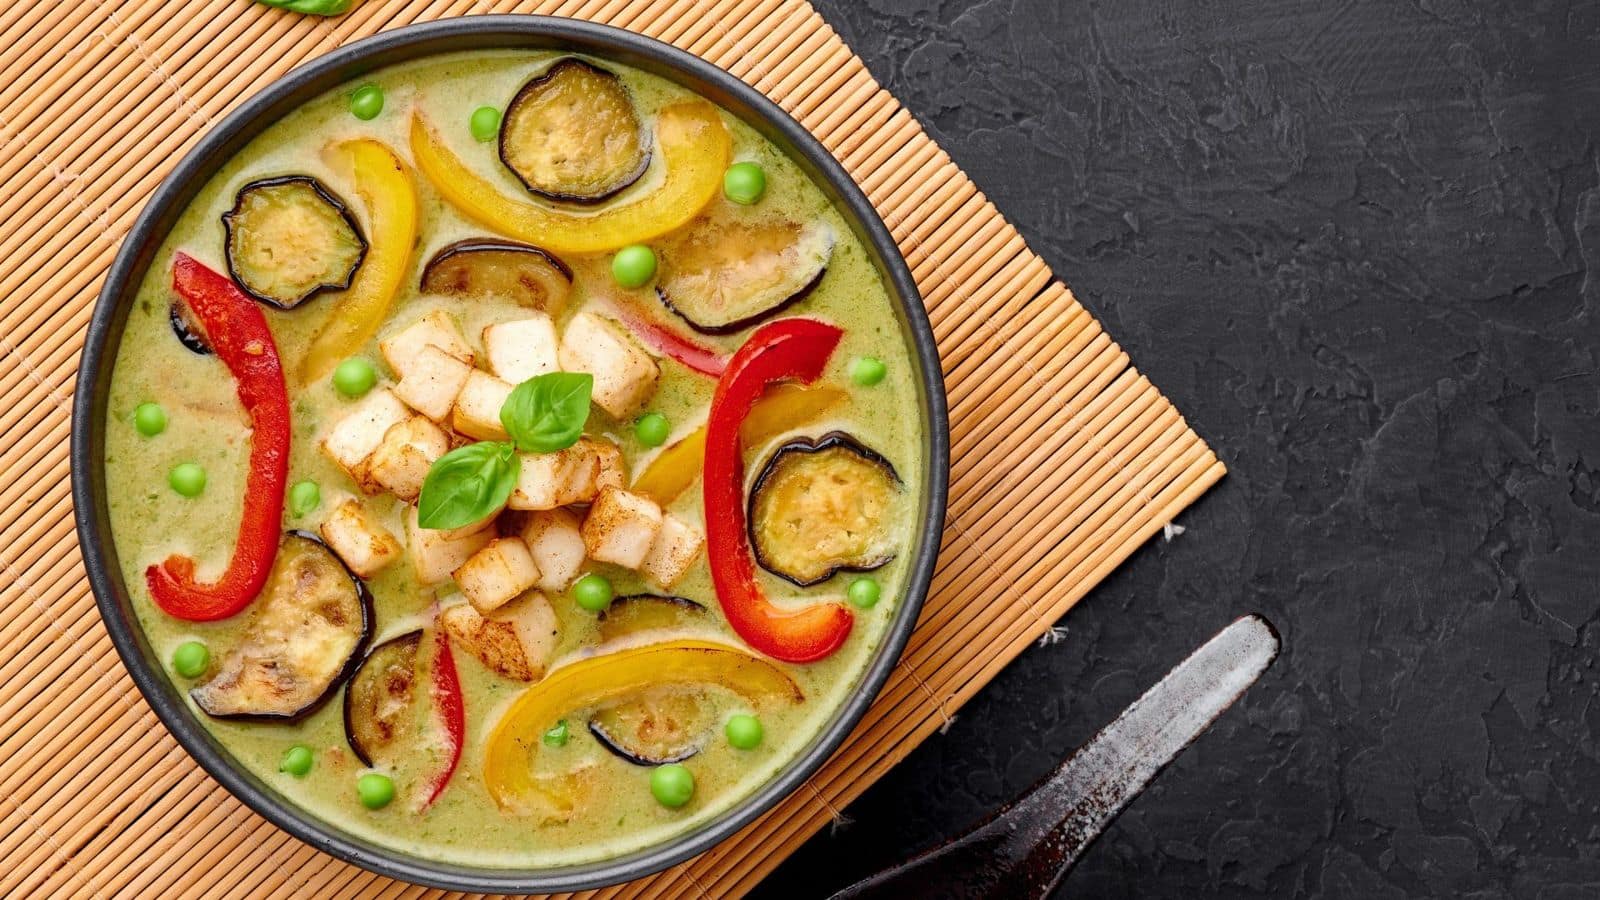 Make this zesty Thai green curry at home